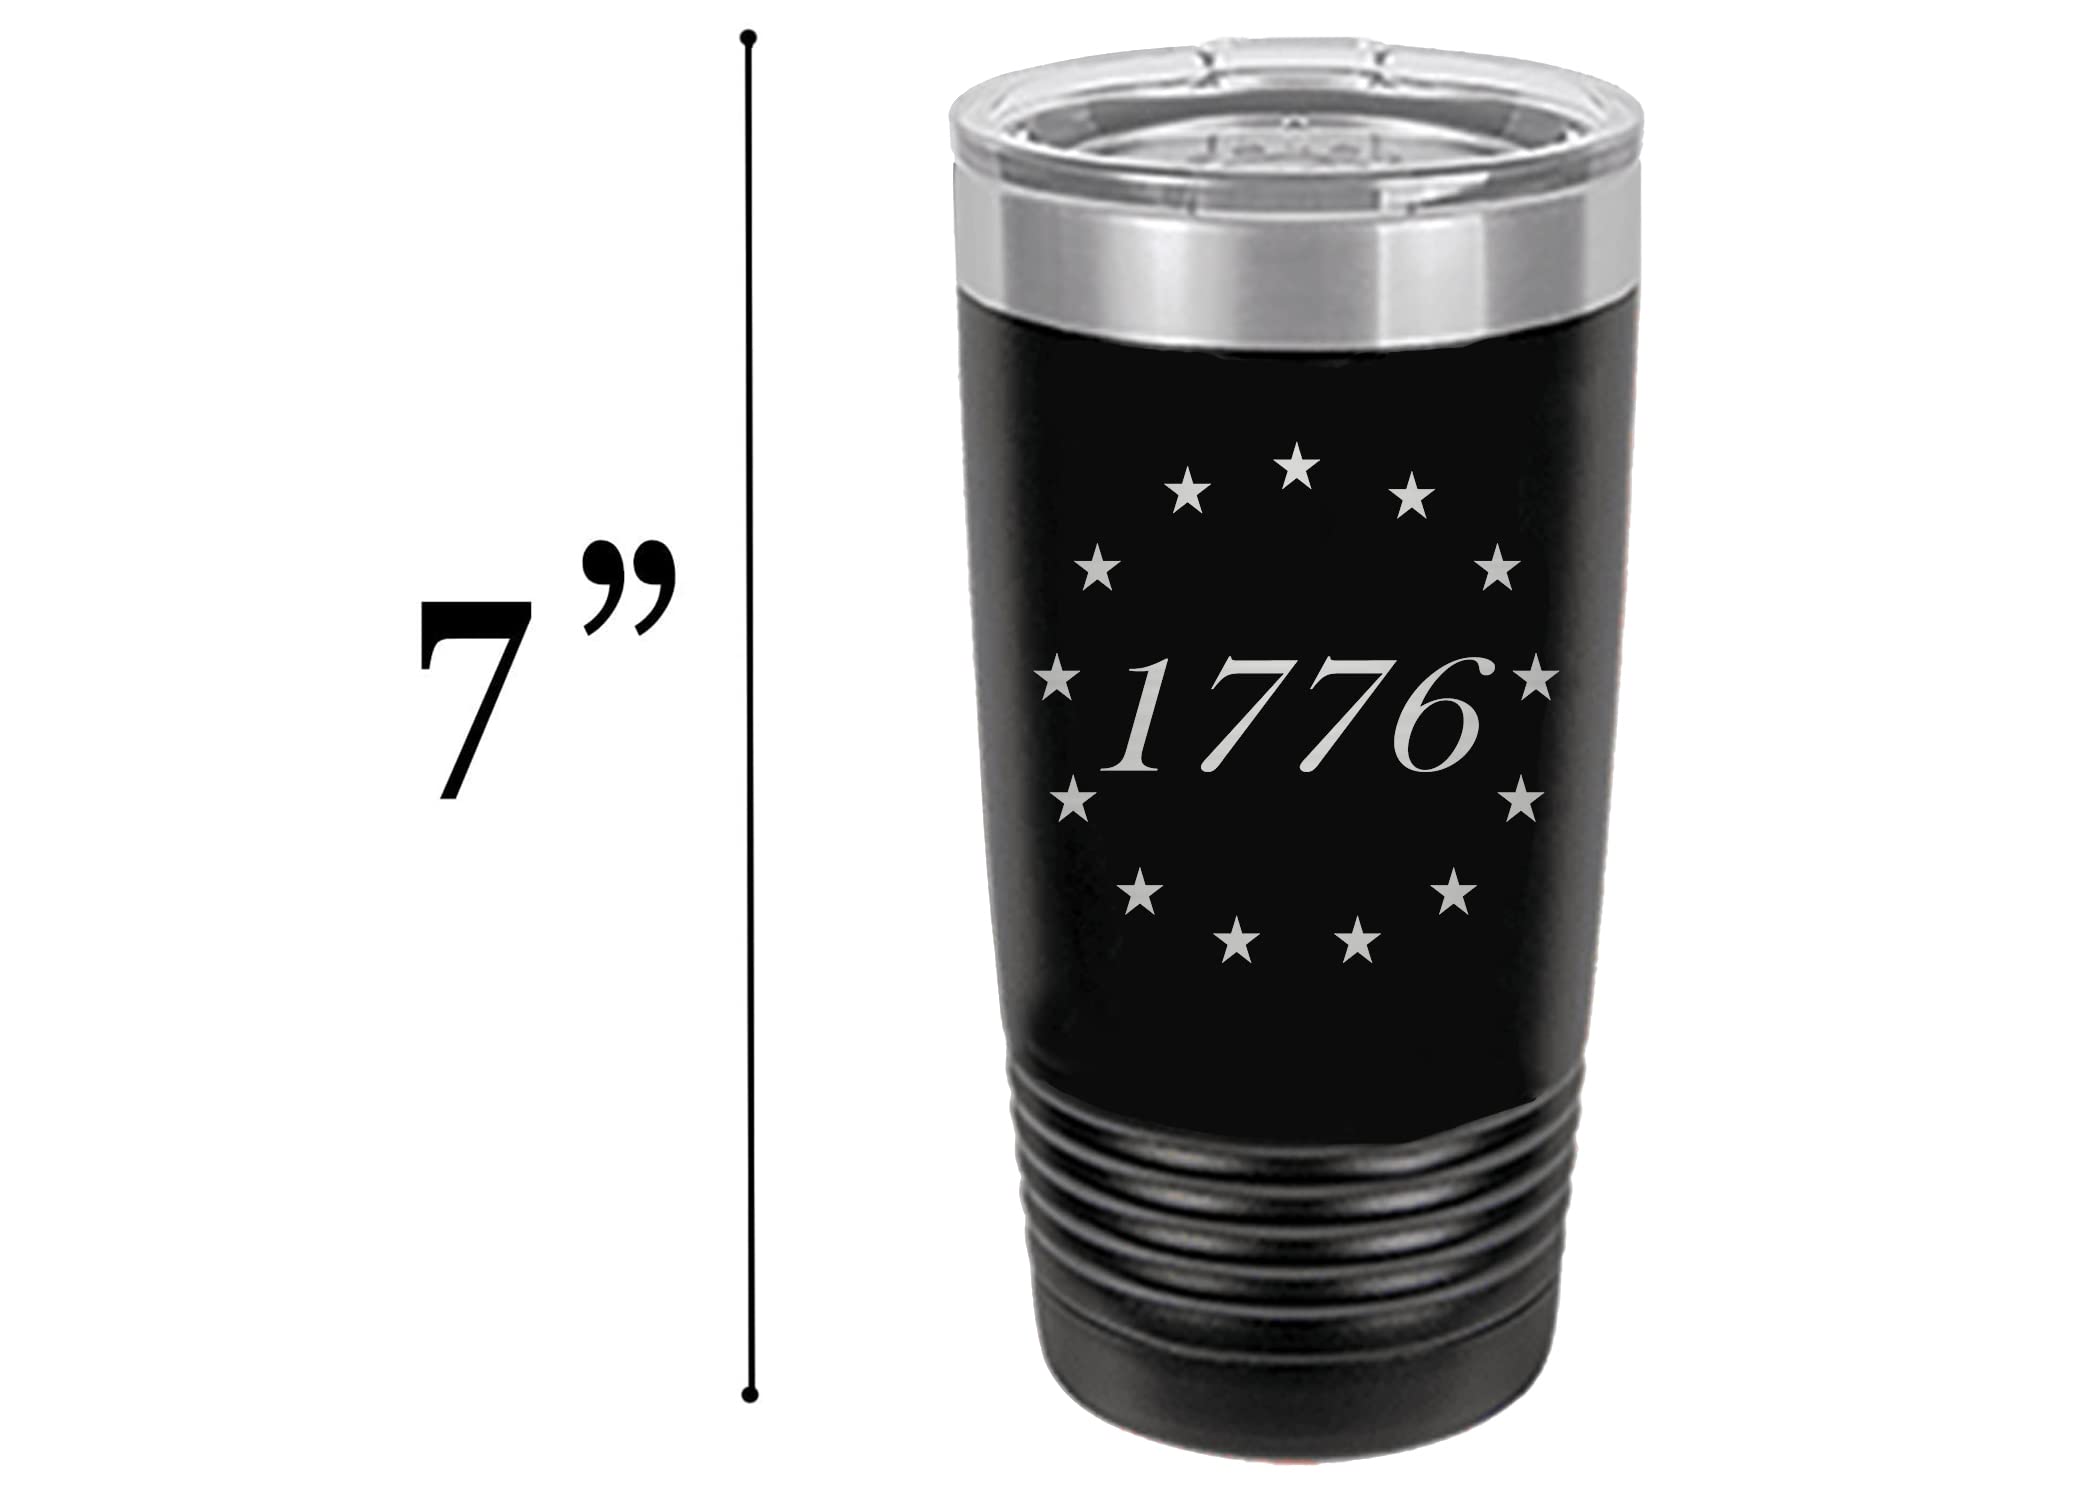 Rogue River Tactical Betsy Ross 1776 American USA Flag 20 Oz. Travel Tumbler Mug Cup w/Lid Vacuum Insulated Hot or Cold Military Vet Gift (Black)